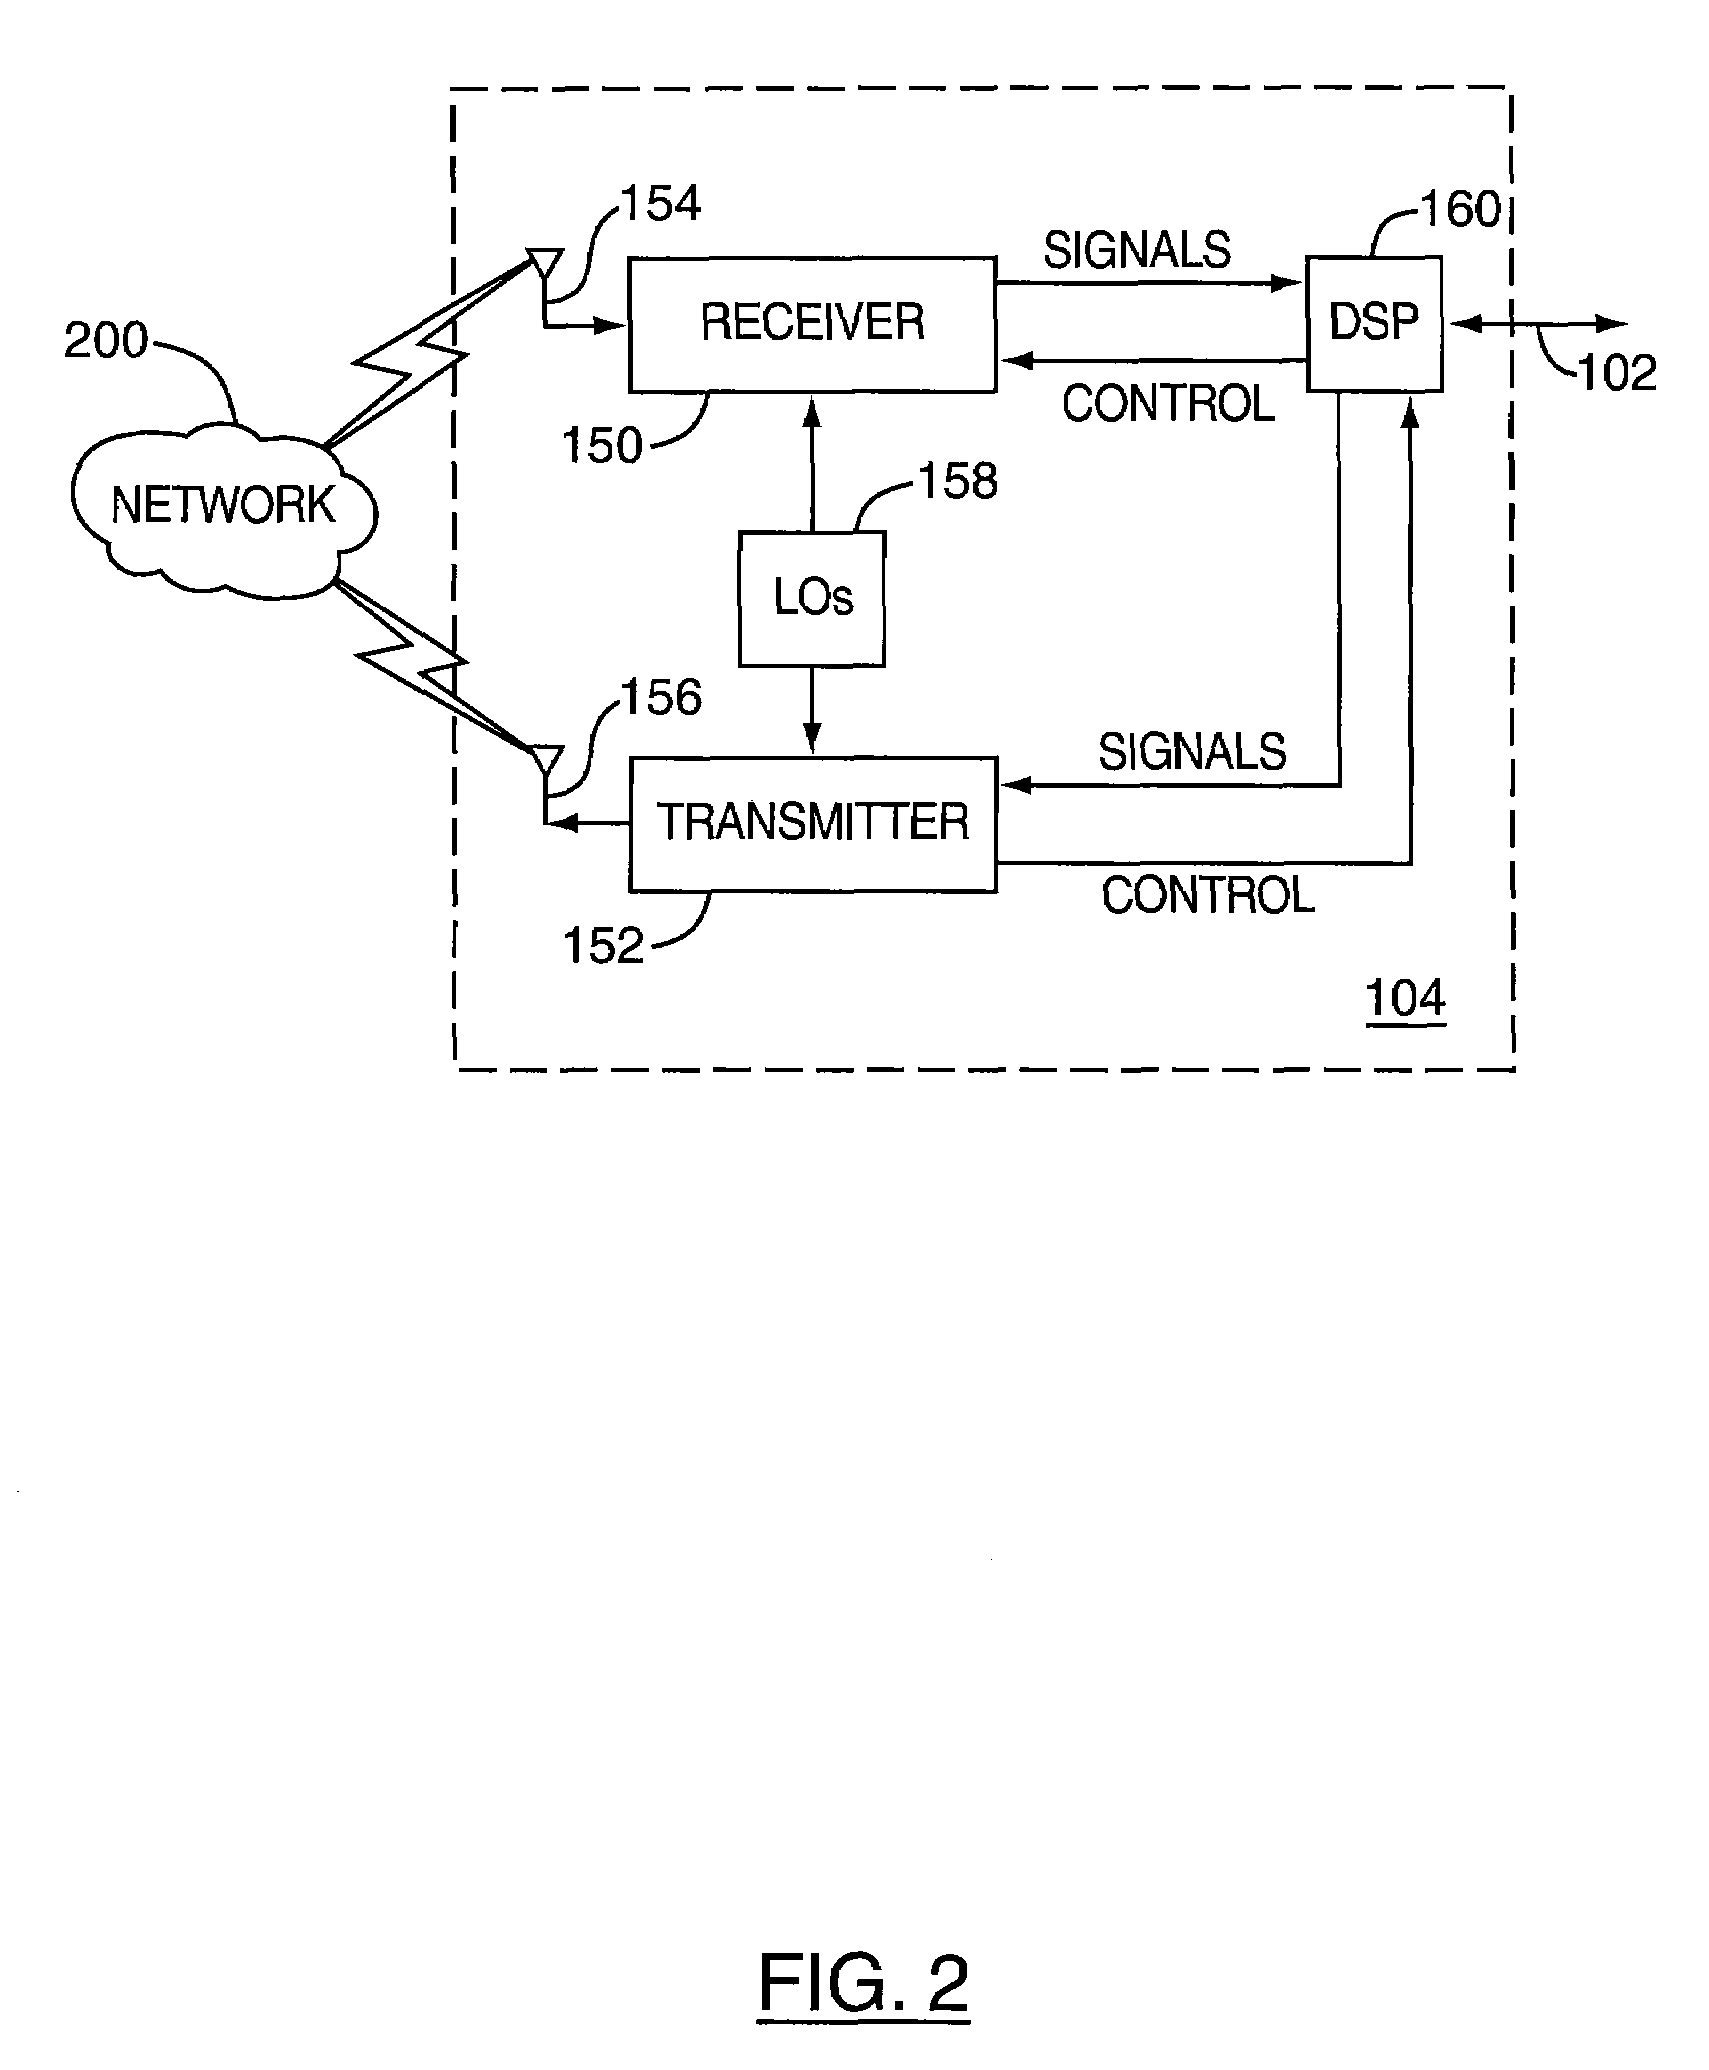 Apparatus and method for integrating authentication protocols in the establishment of connections between computing devices